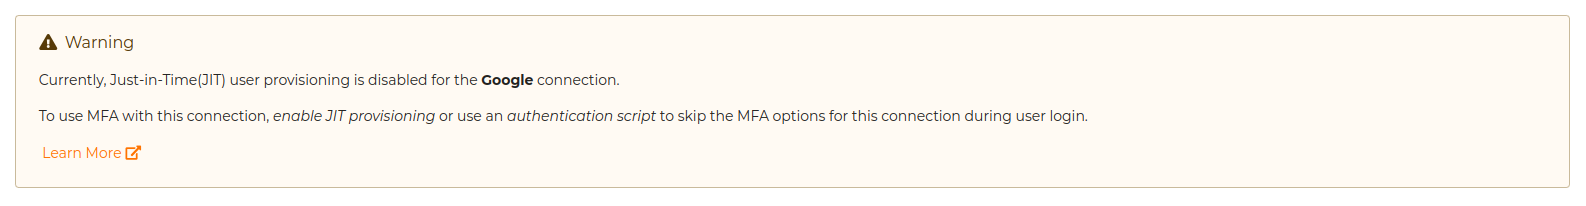 MFA based Sign-in flow with JIT user provisioning